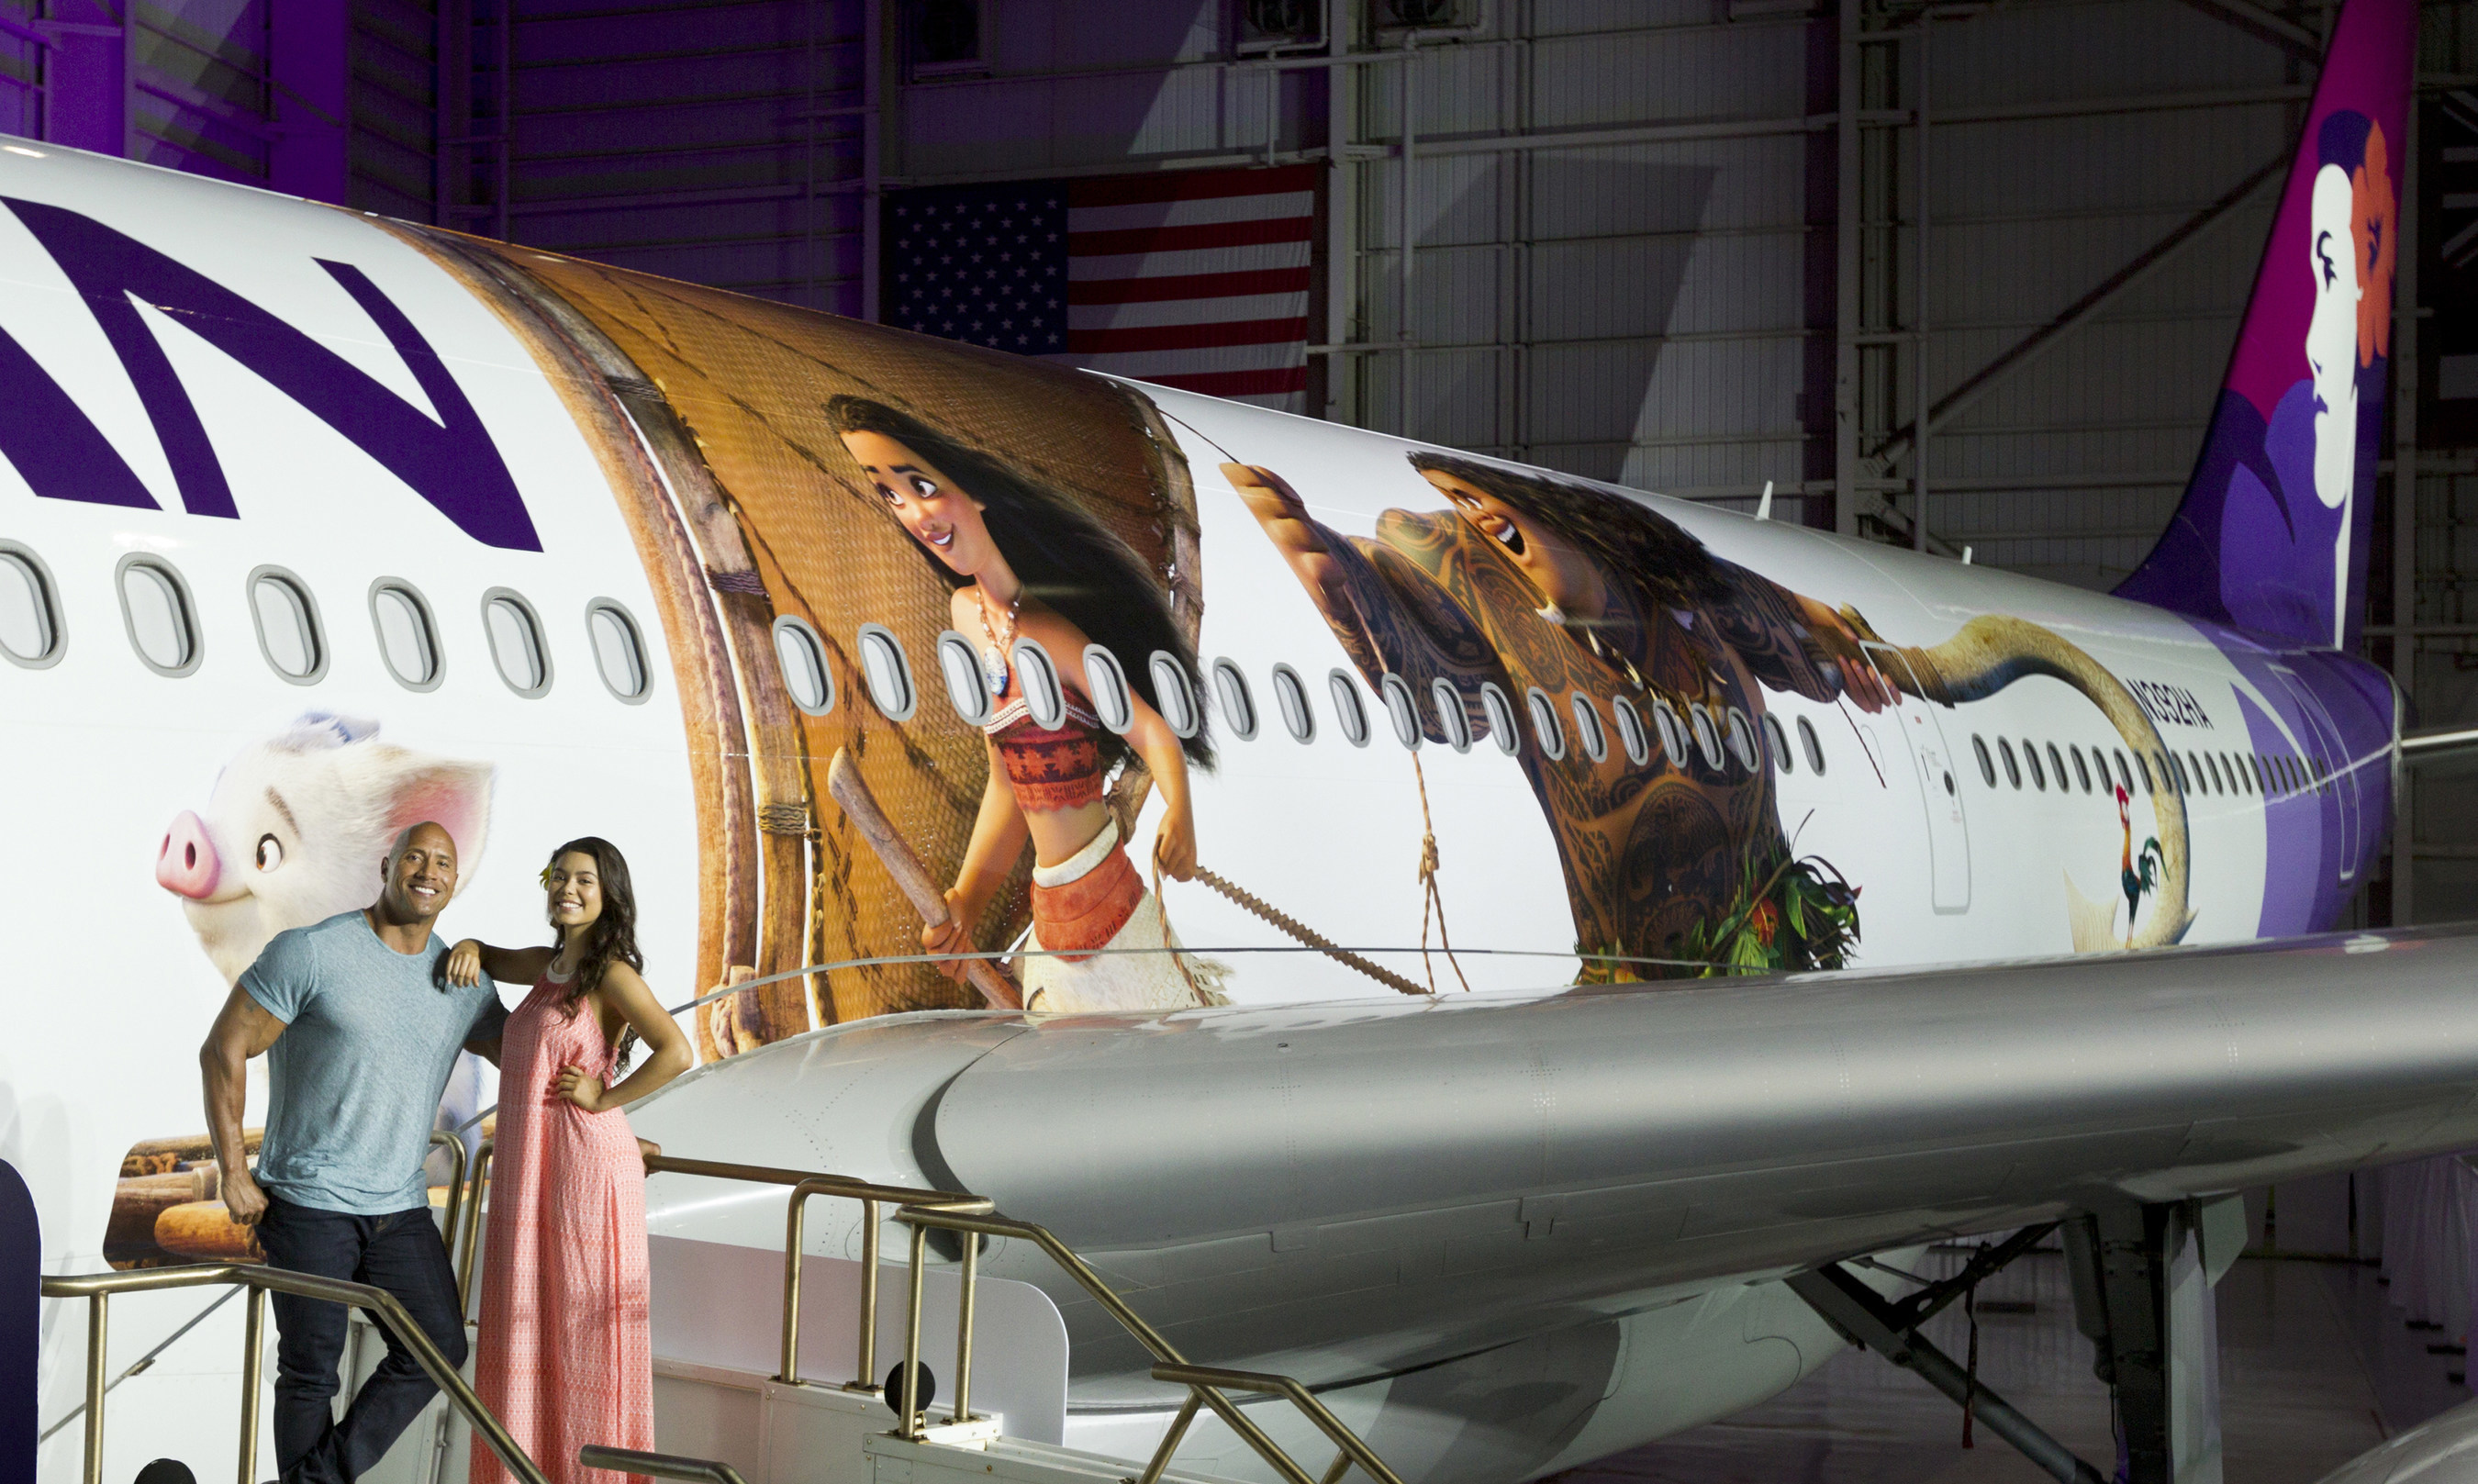 Hawaiian Airlines today revealed the first of three "Moana"-themed planes at its home base at Honolulu International Airport (HNL).  Auli'i Cravalho, the Hawaiʻi-born actress who is the voice of Disney's "Moana," and Dwayne Johnson, the voice of demigod Maui, were among the first to see the inspiring new design. Photo by Donald Traill for Hawaiian Airlines